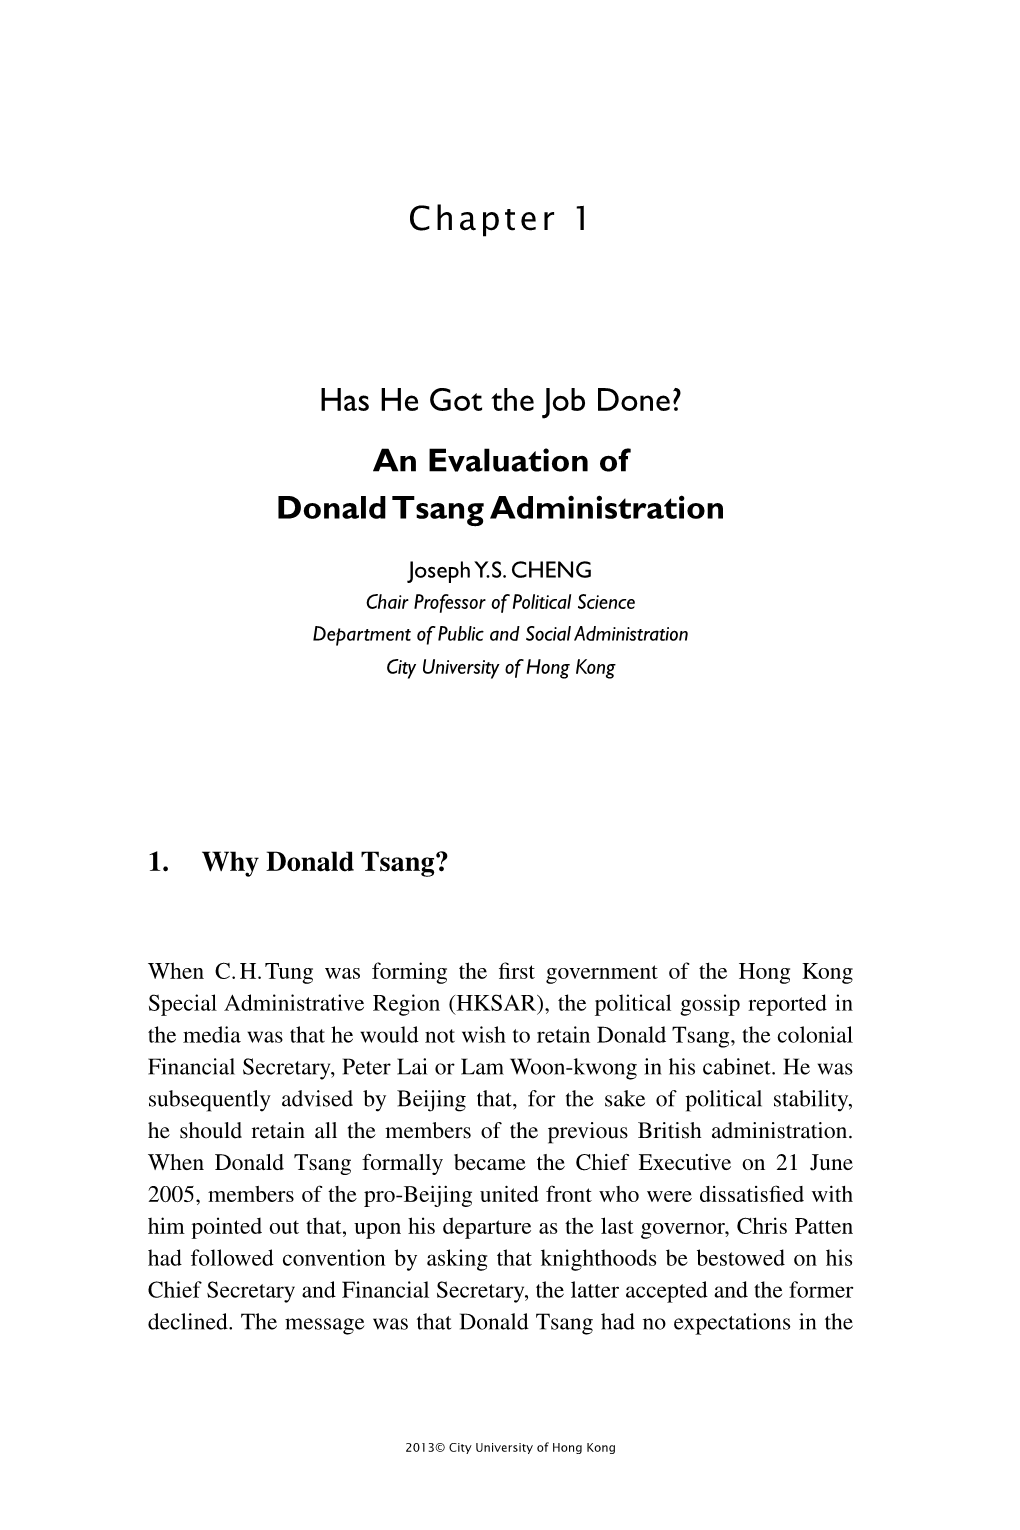 Chapter 1 Has He Got the Job Done? an Evaluation of Donald Tsang